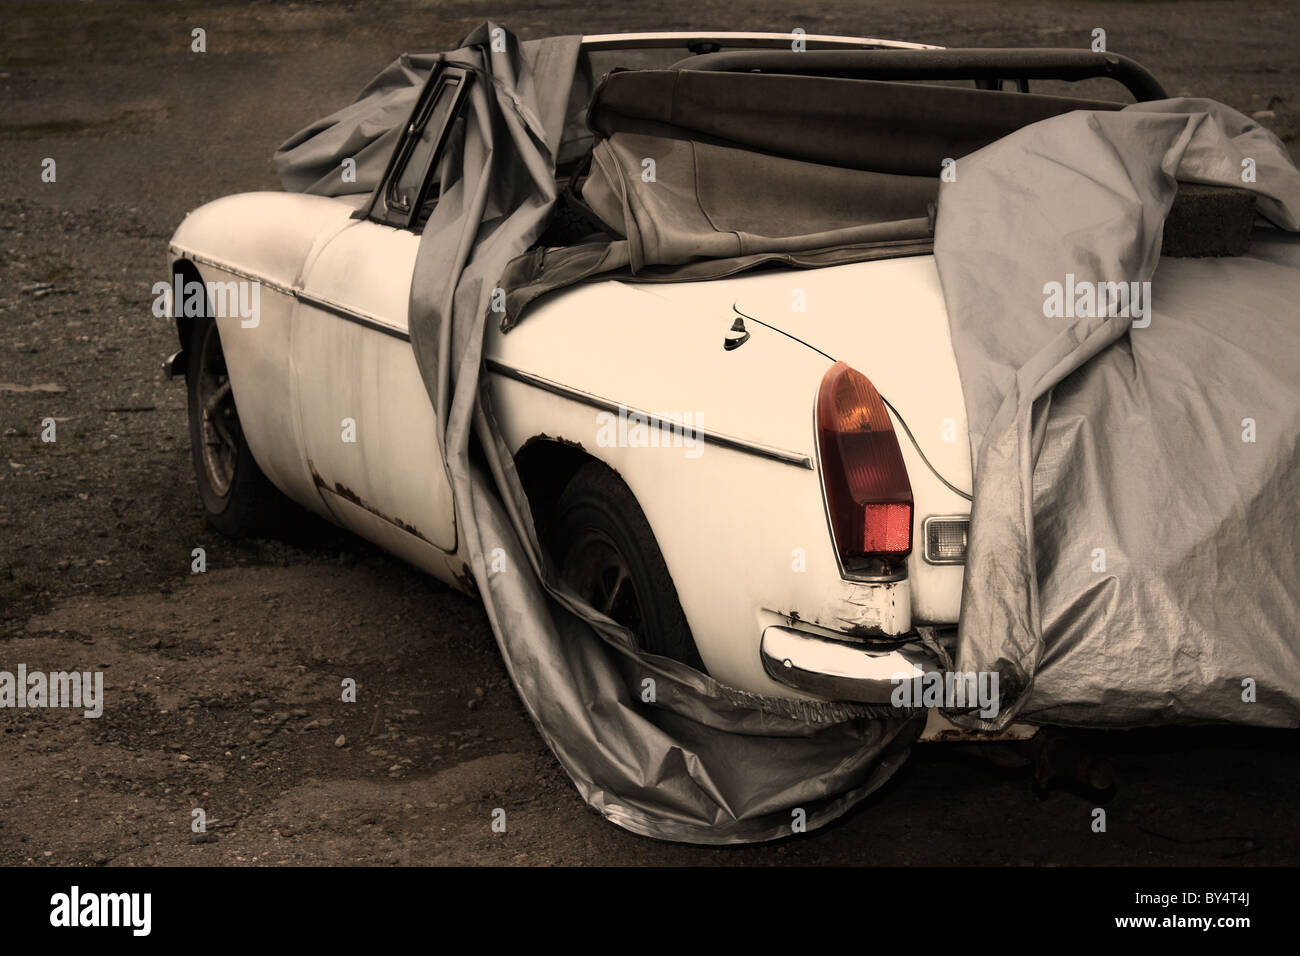 An old classic MG white car covered up and ready to be repaired as a restoration project Stock Photo